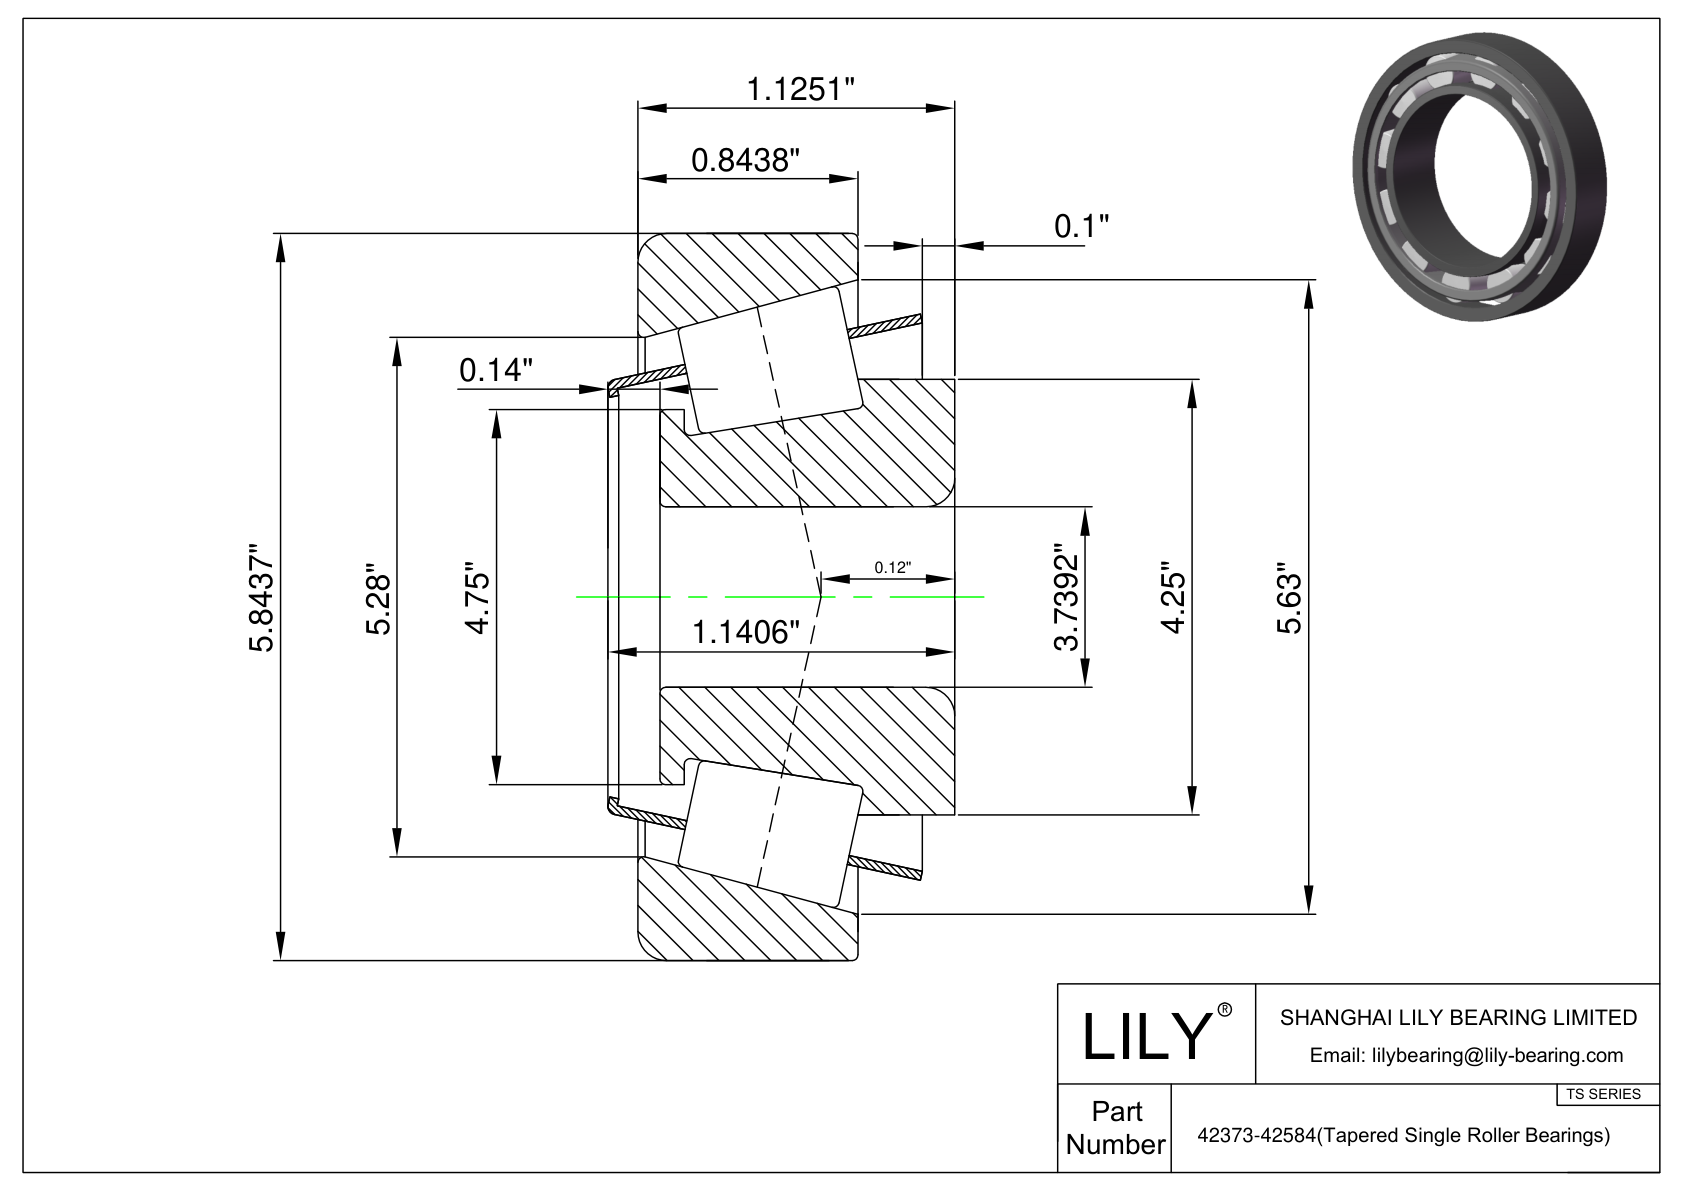 42373-42584 TS (Tapered Single Roller Bearings) (Imperial) cad drawing